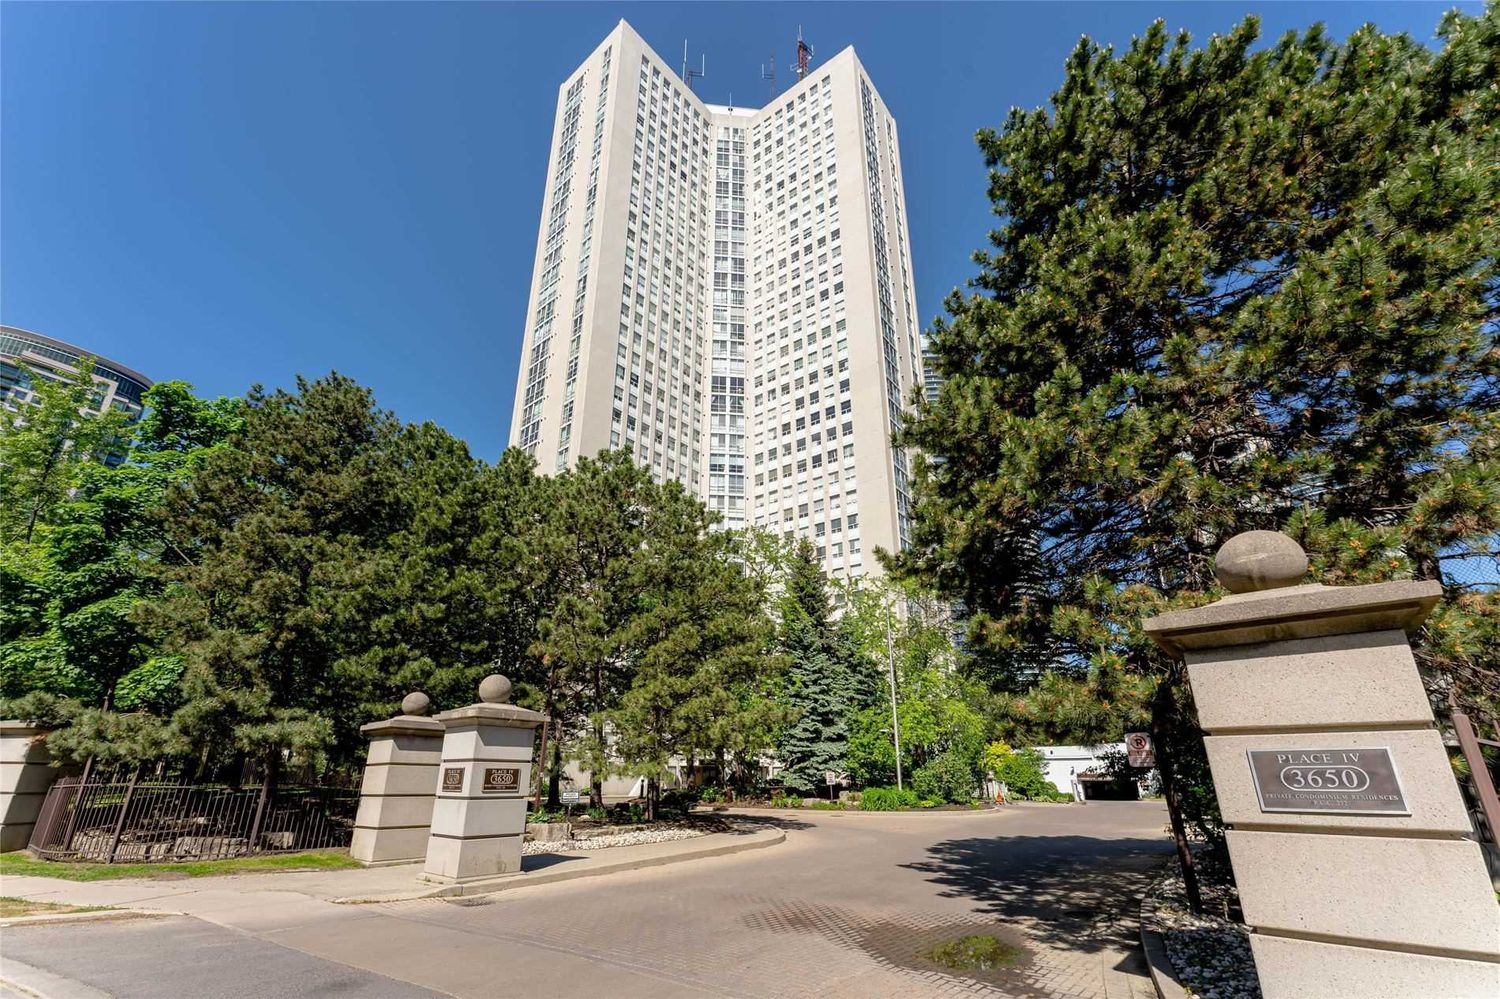 3650 Kaneff Crescent. Place IV Condos is located in  Mississauga, Toronto - image #1 of 2